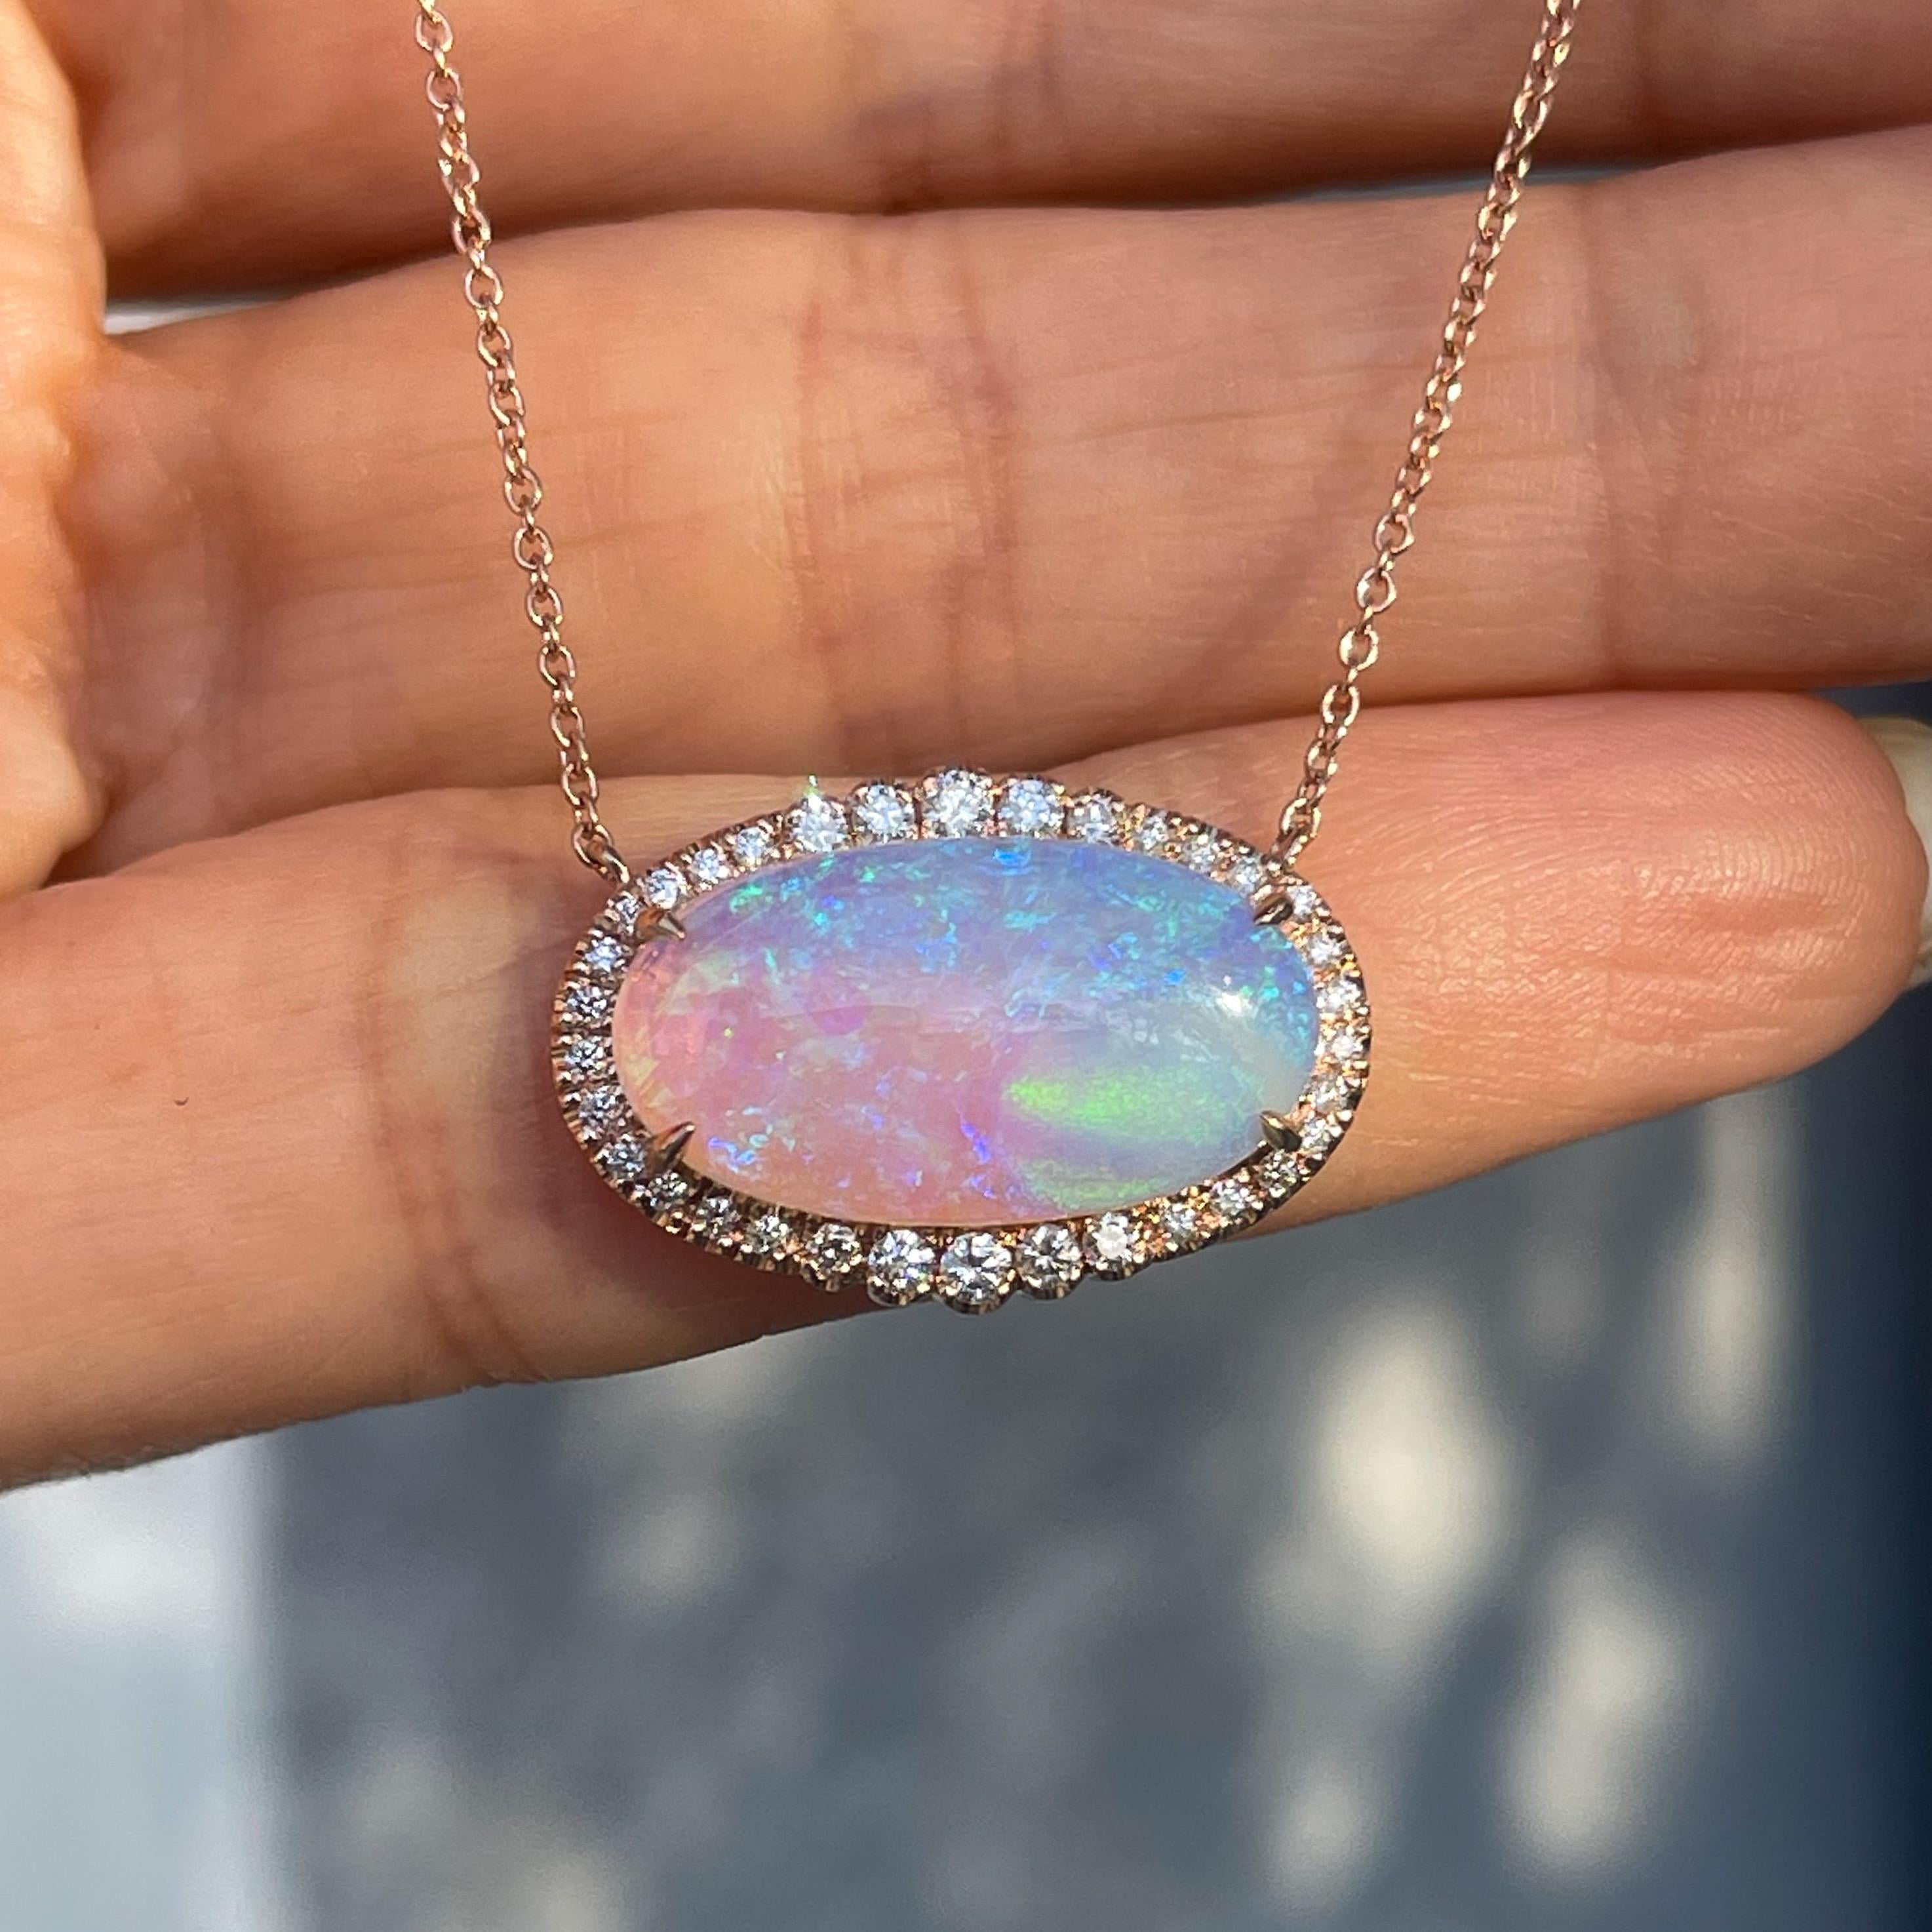 Swirling within this Australian Opal Necklace is an otherworldly scene. A stunning green nebula floats within a crystal opal, encircled by a diamond halo. The elongated stone is set east west, filling a panoramic skyscape with soft shades of